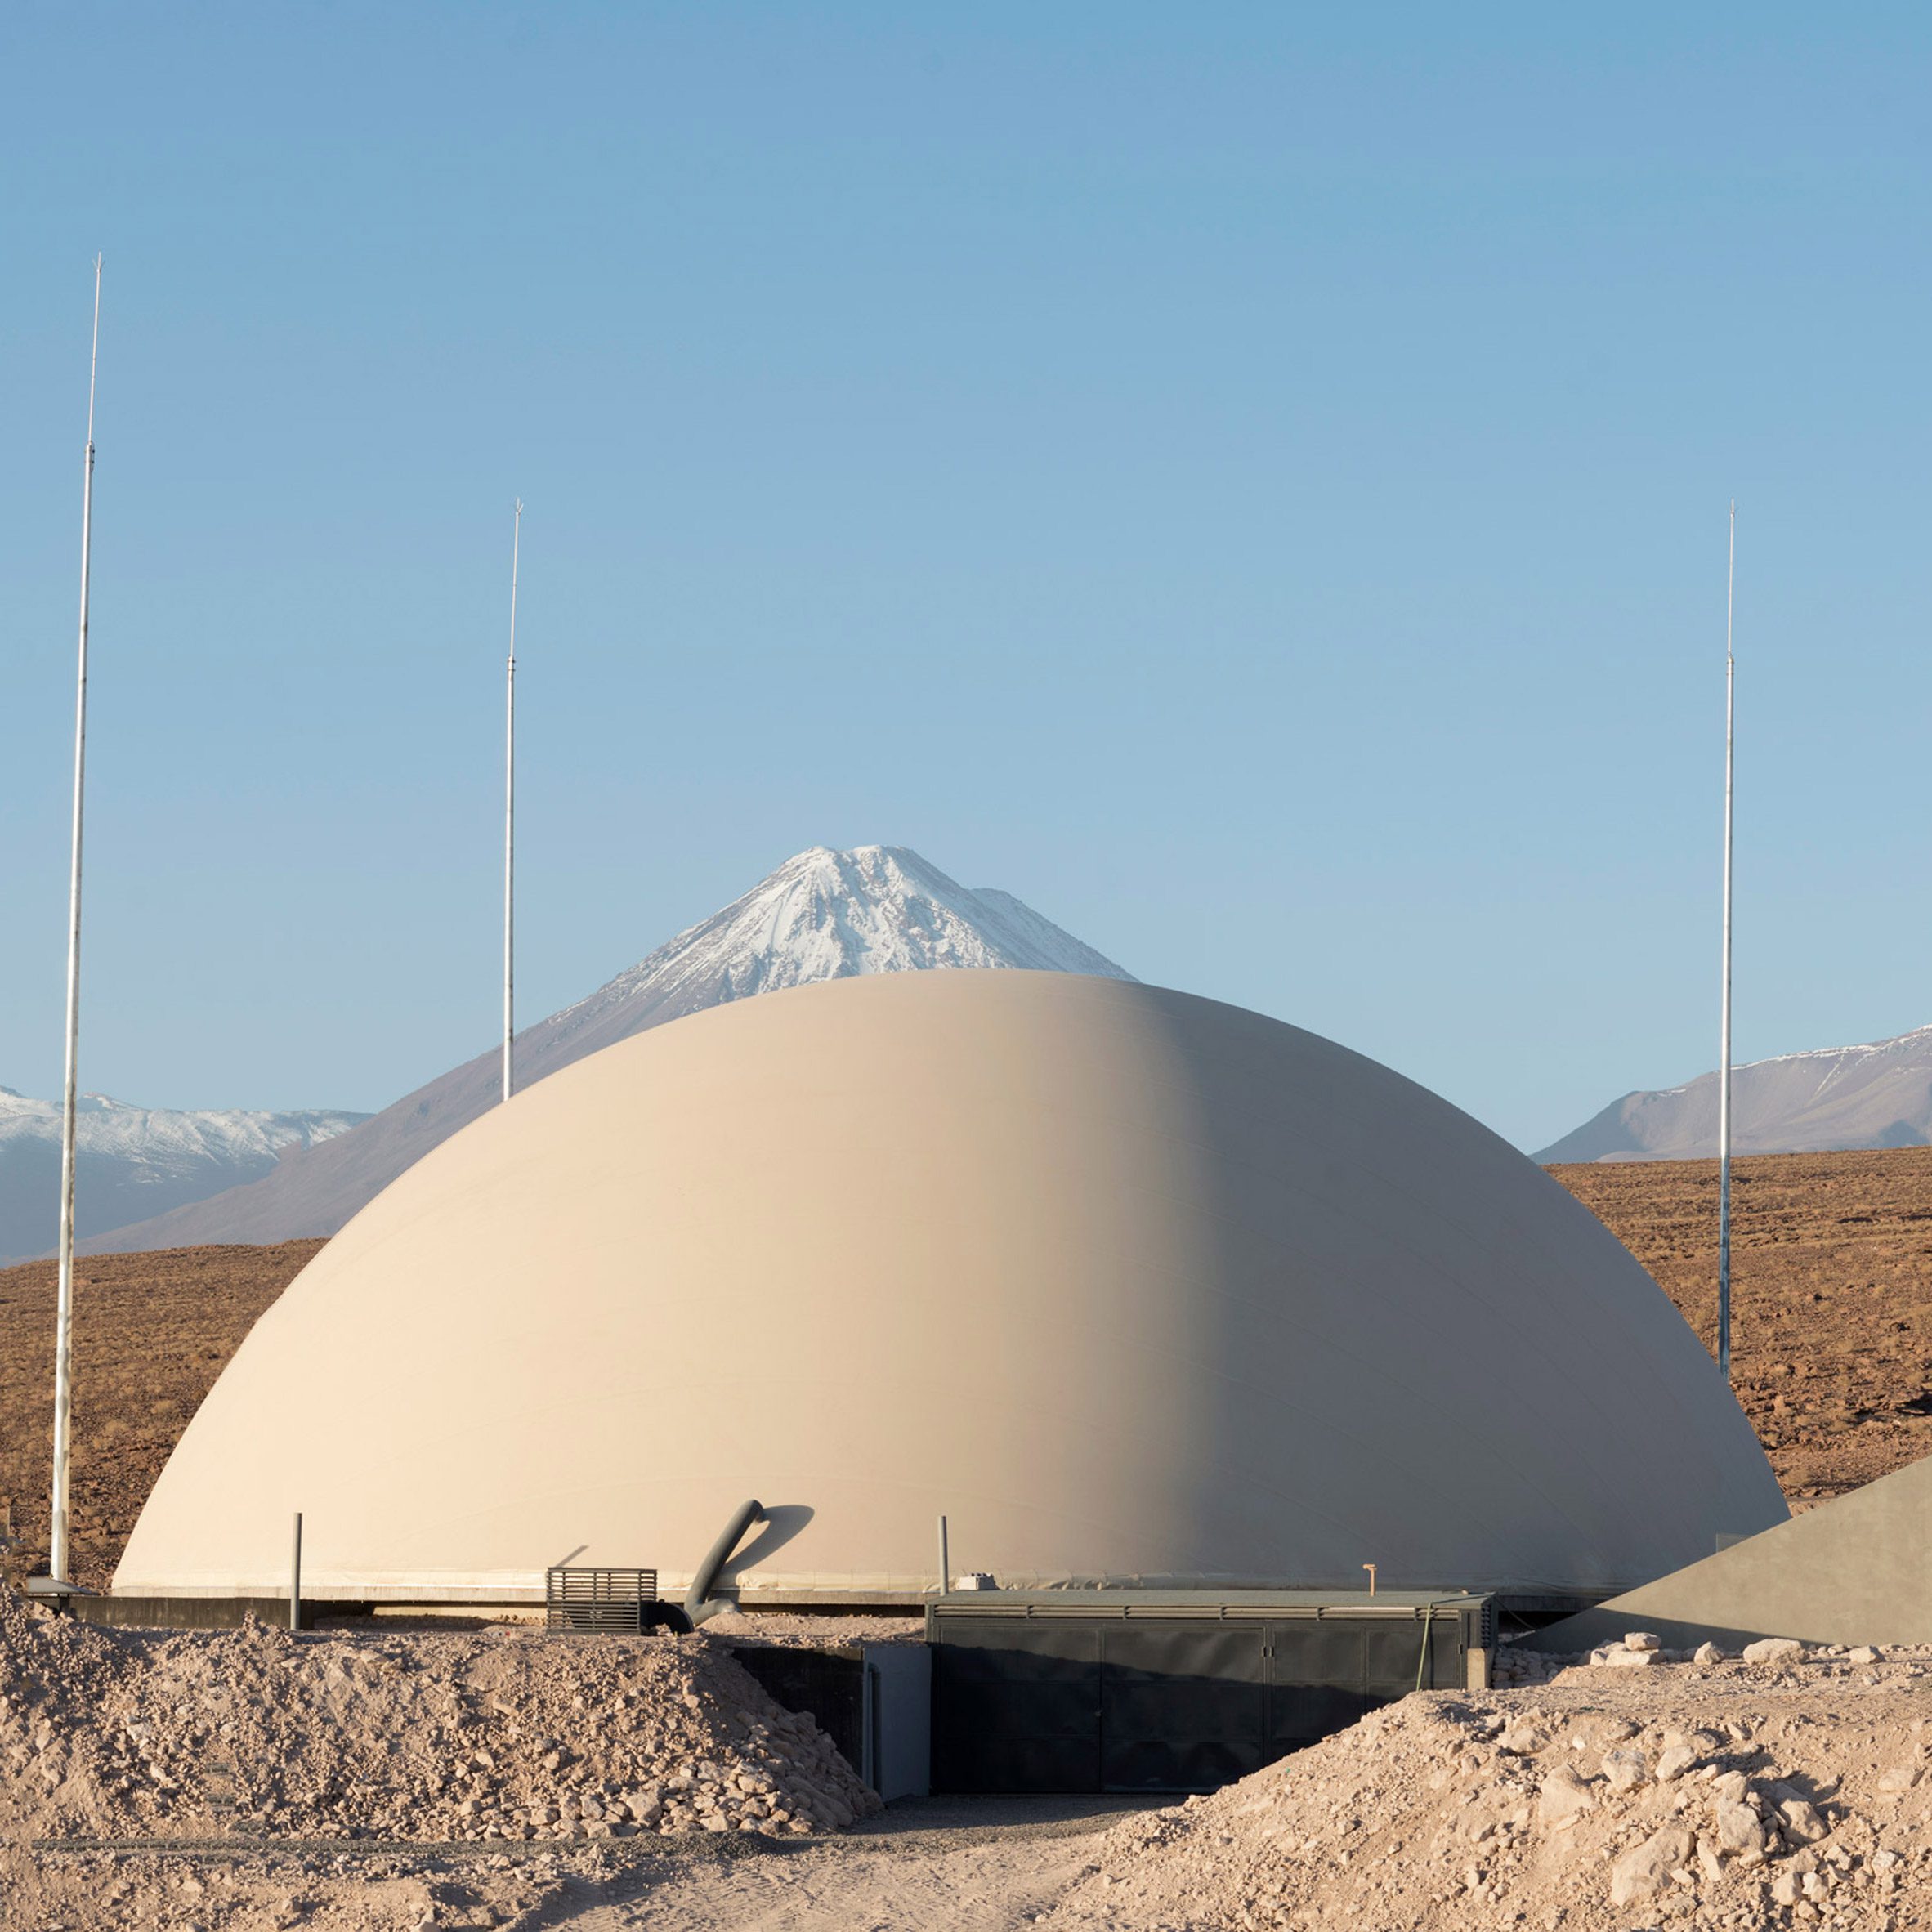 A domed structure in front of the Chilean Andes in the desert